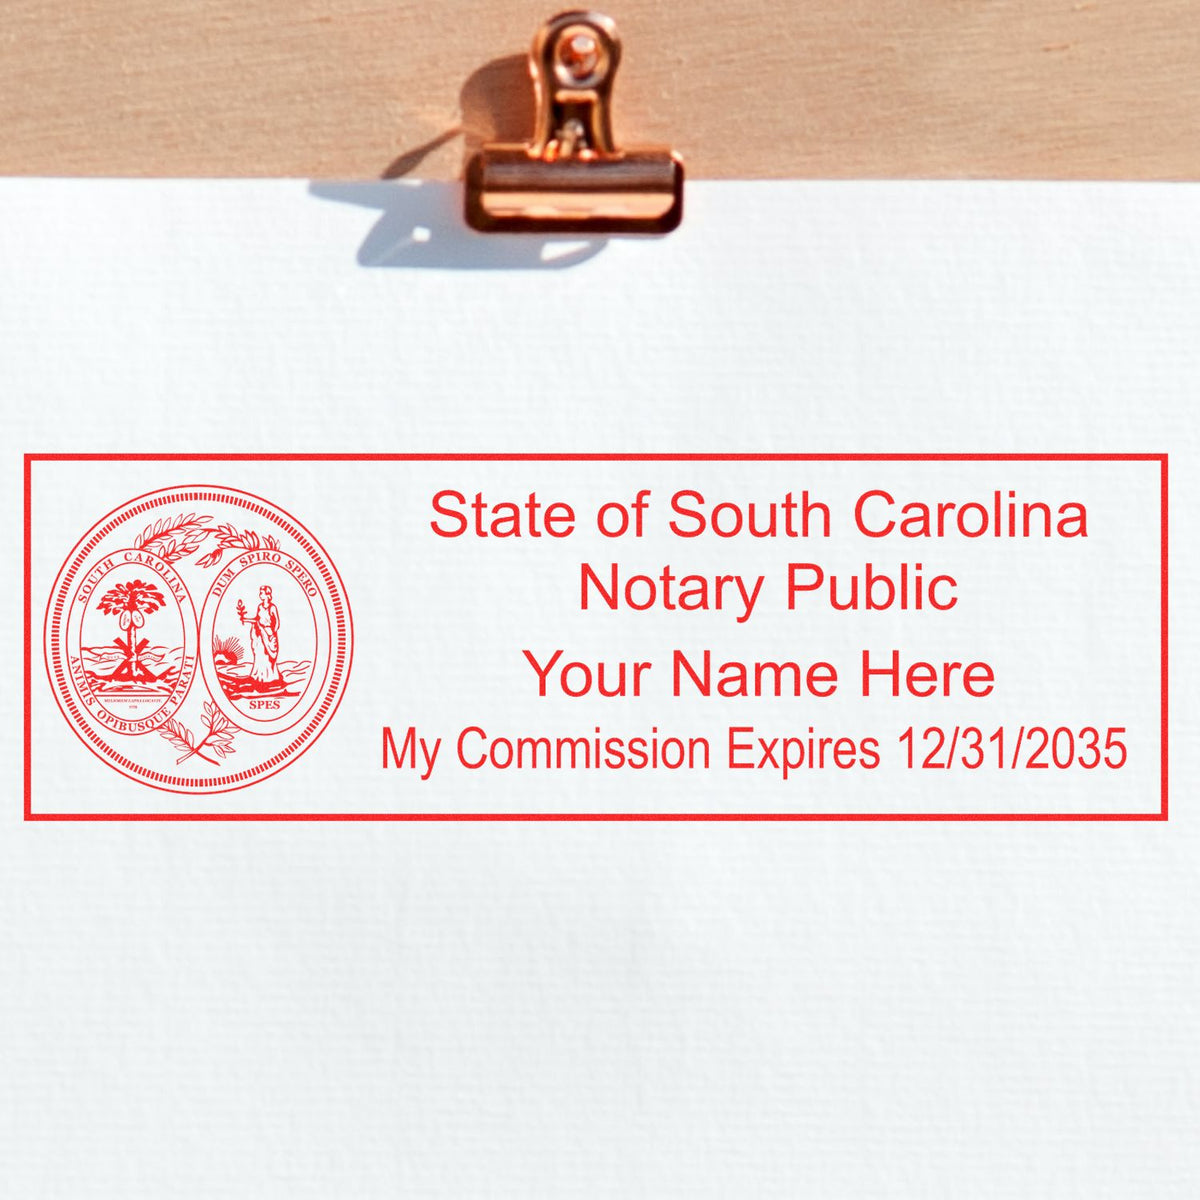 Another Example of a stamped impression of the Super Slim South Carolina Notary Public Stamp on a piece of office paper.